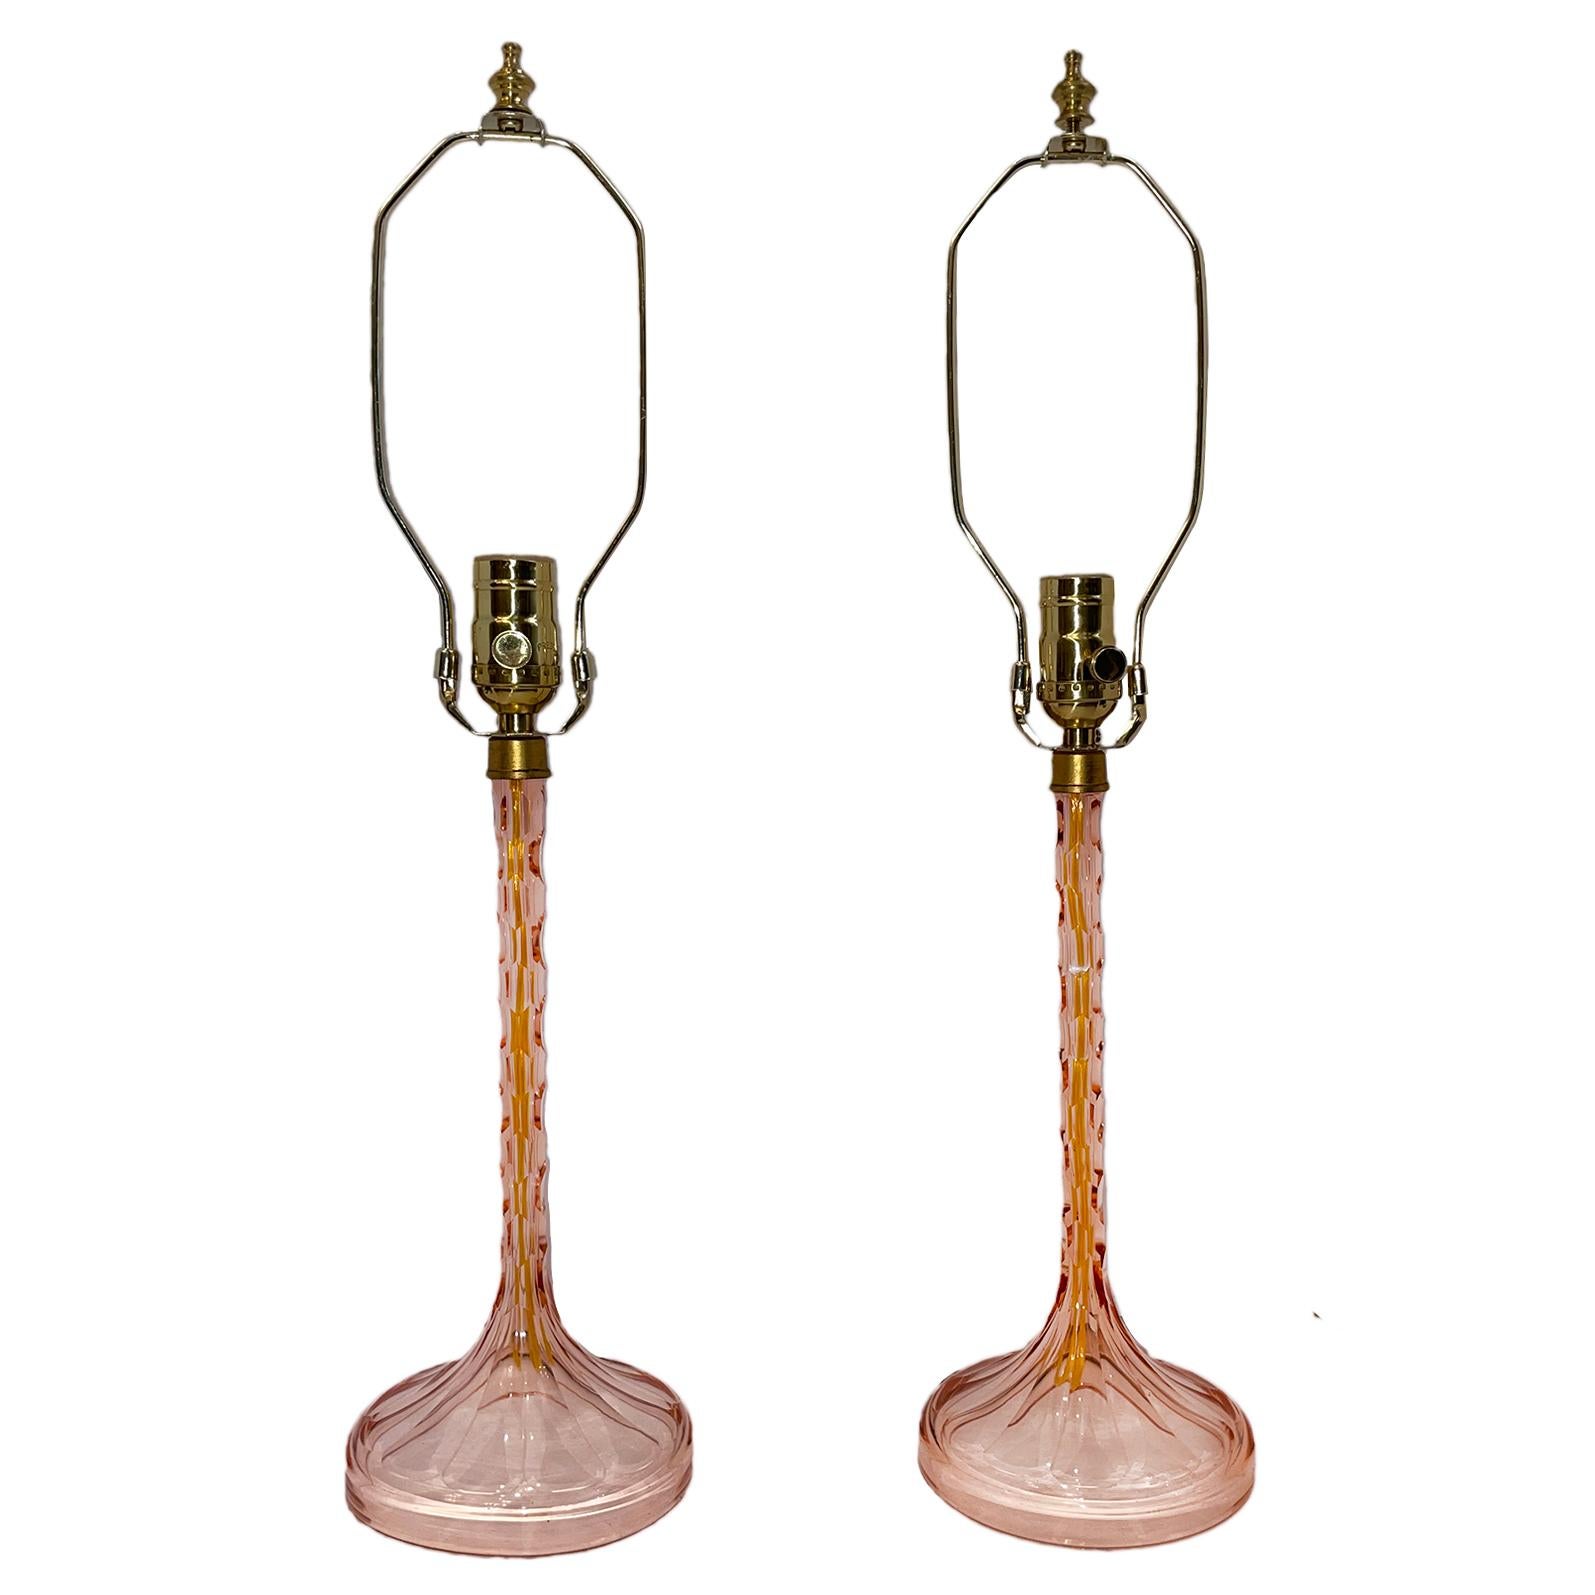 Pair of circa 1930's. French rose colored cut crystal table lamps.

Measurements:
Height of body: 12